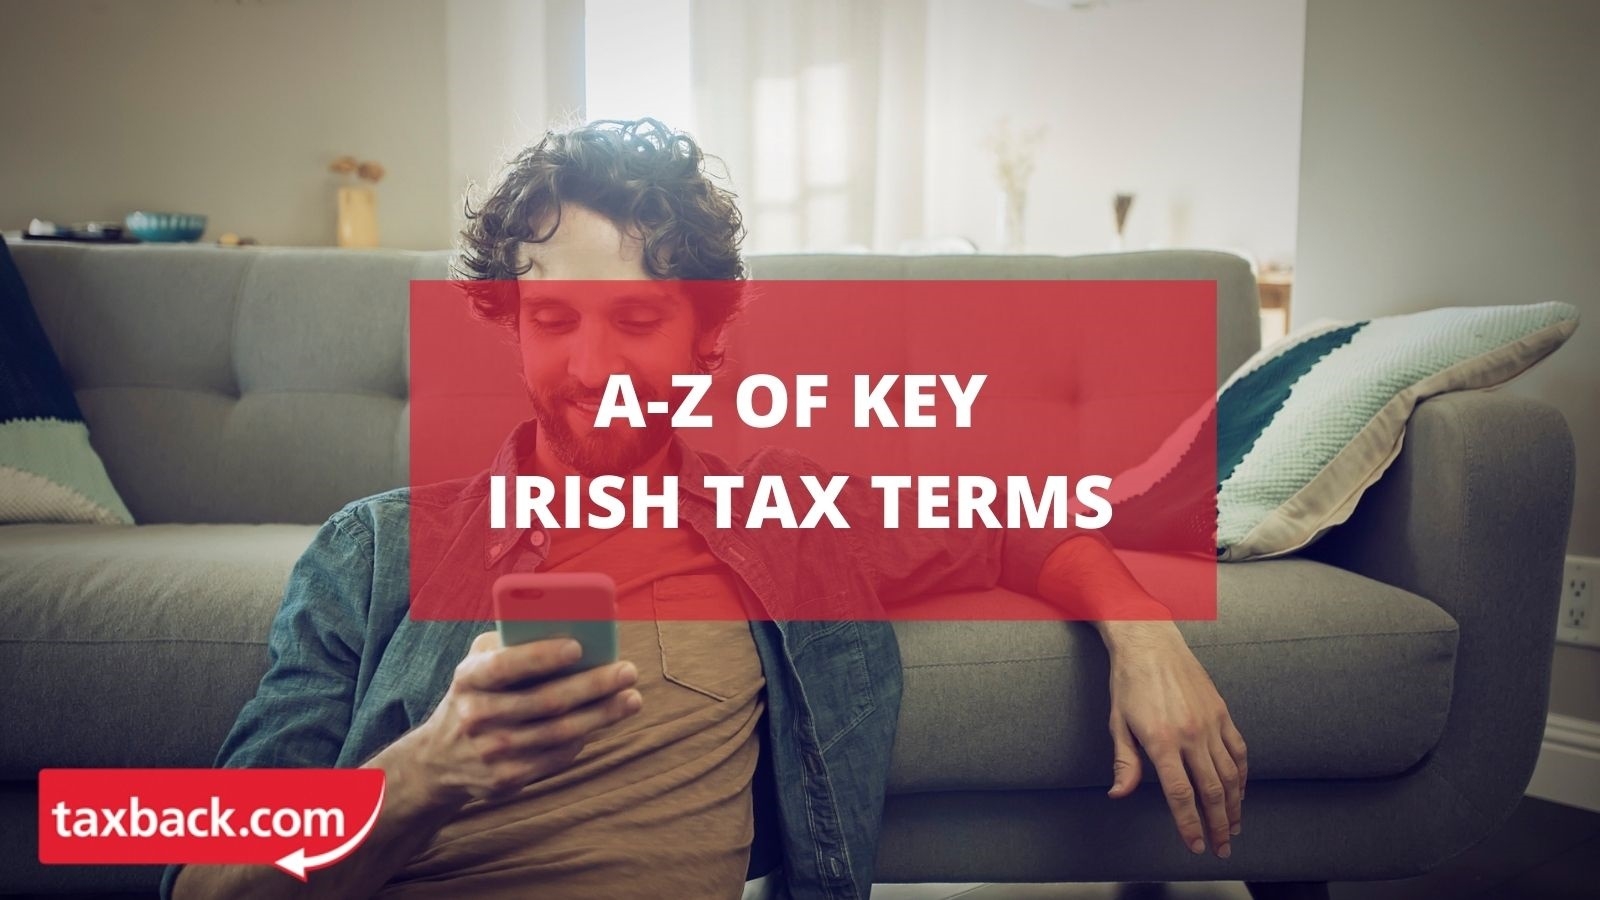 Jargon Buster – Important Irish PAYE Tax terms from A-Z